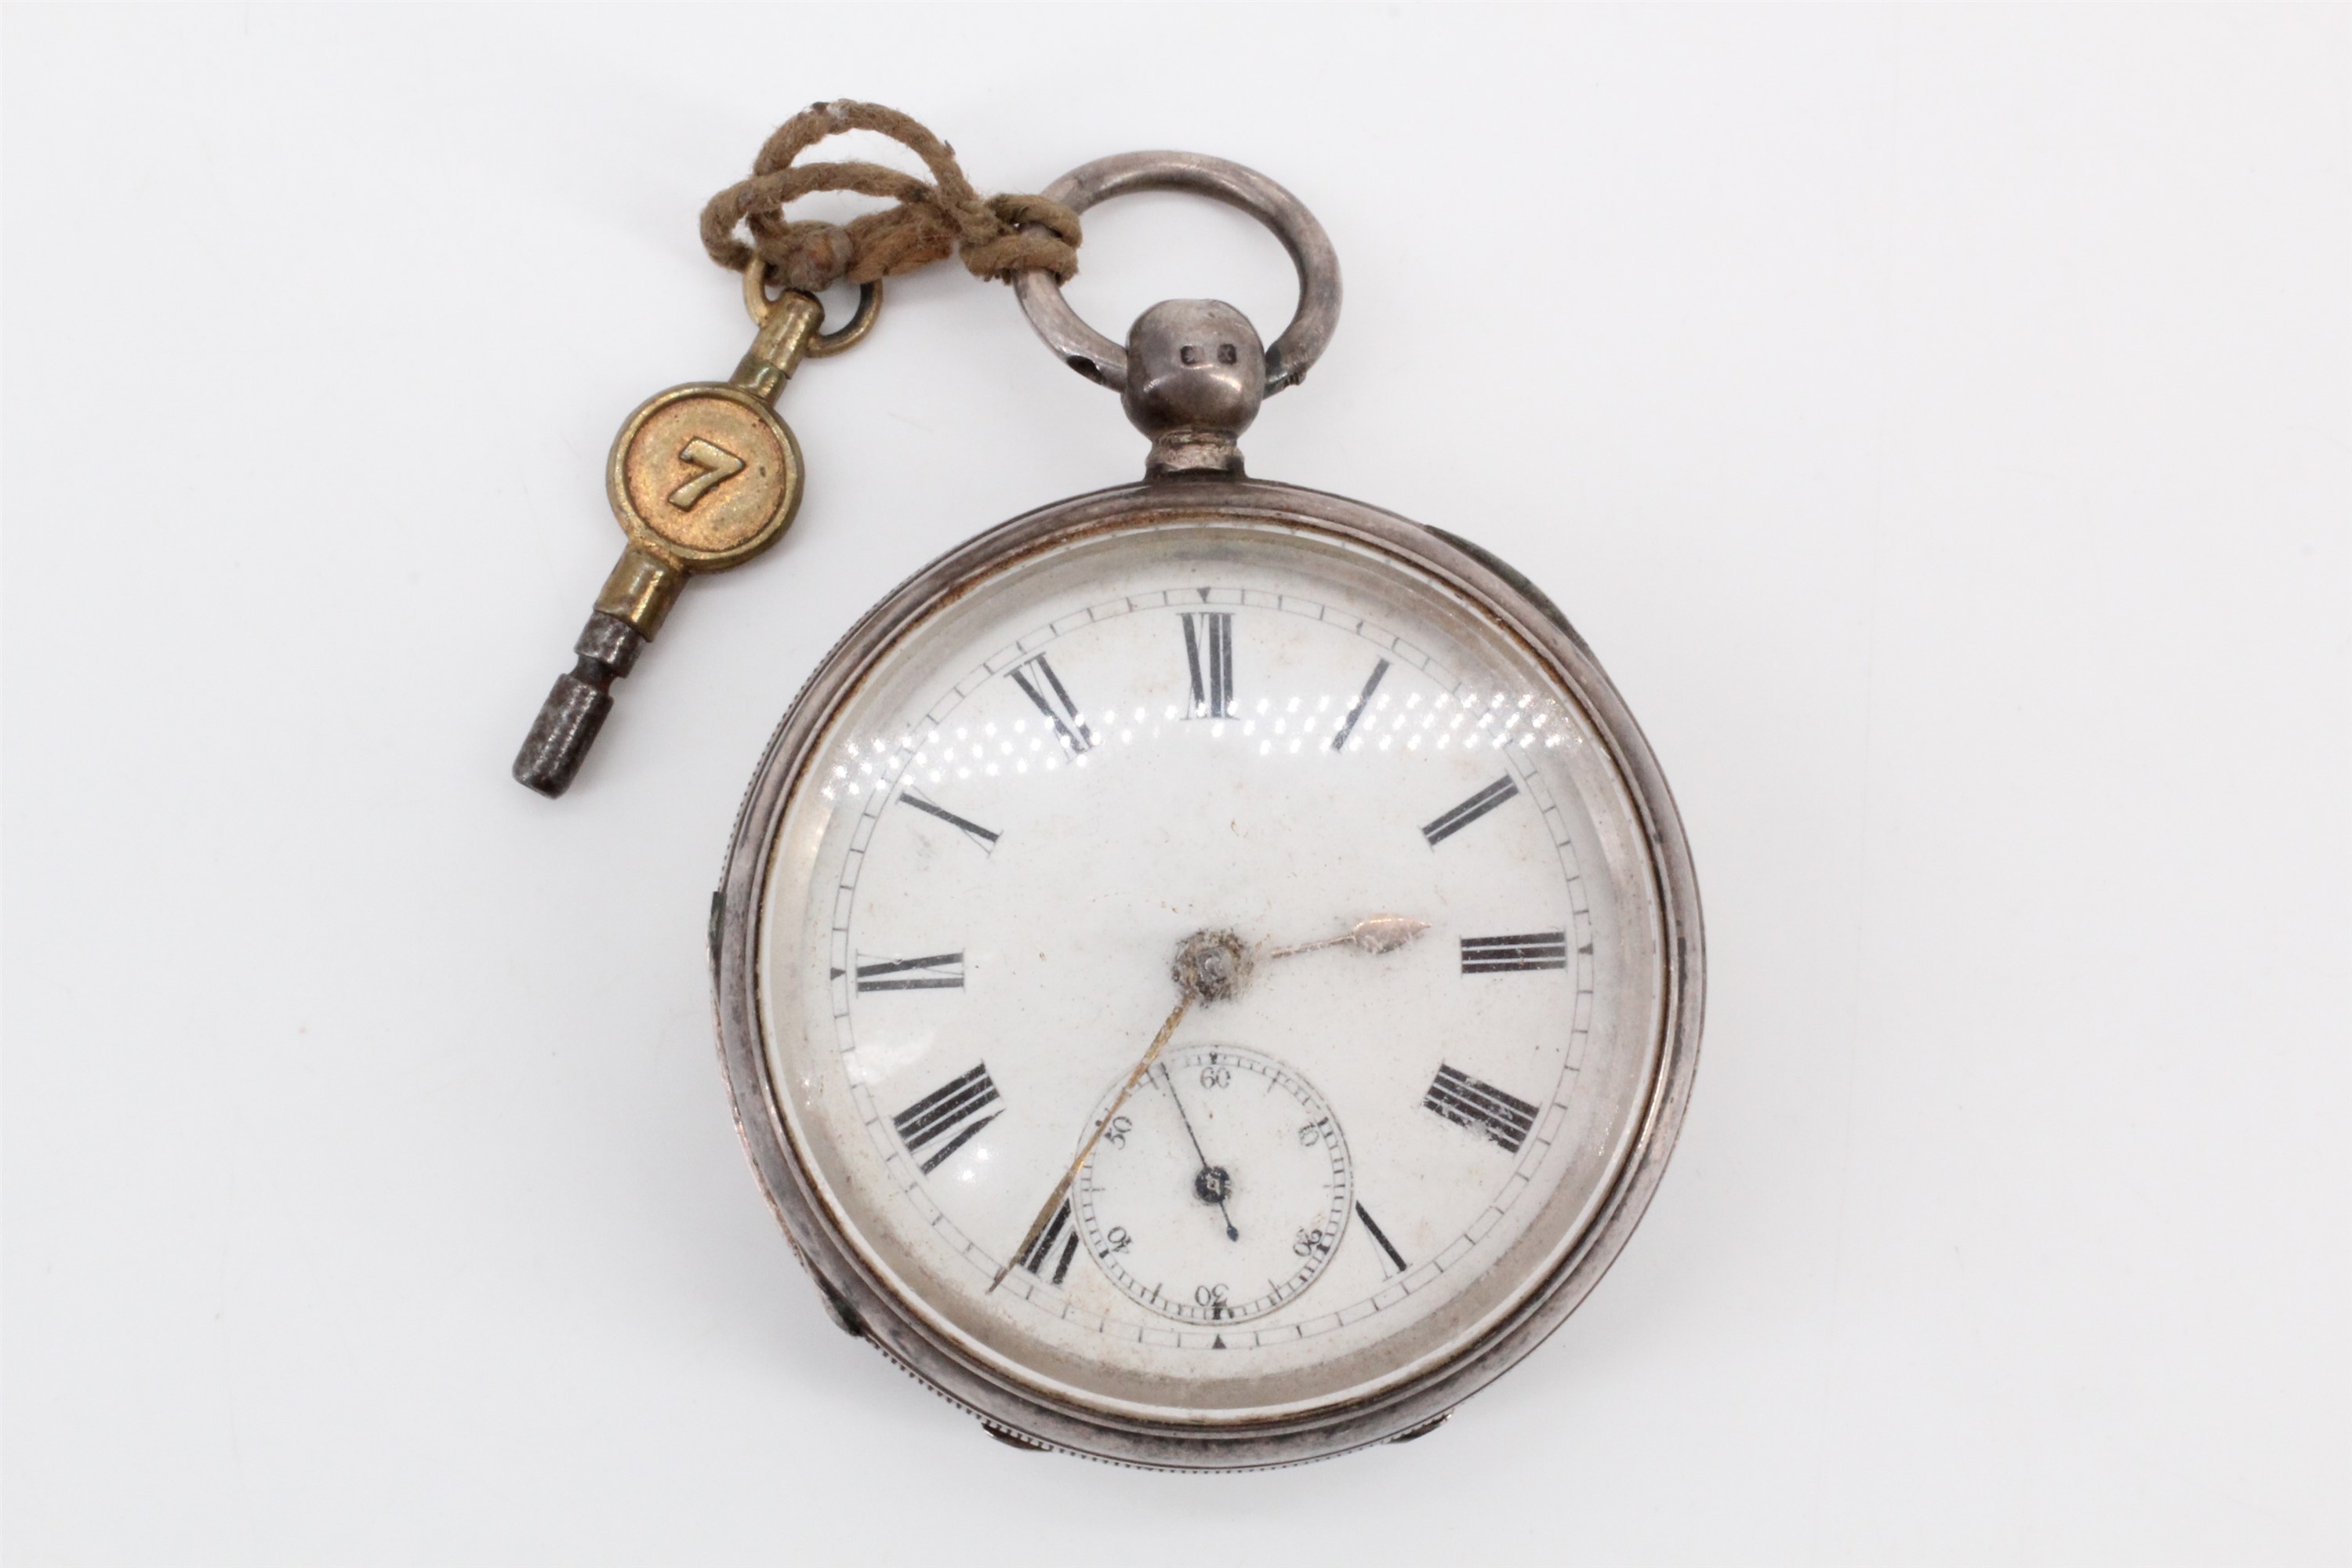 A Victorian silver cased pocket watch, having a white face with Roman numerals and subsidiary